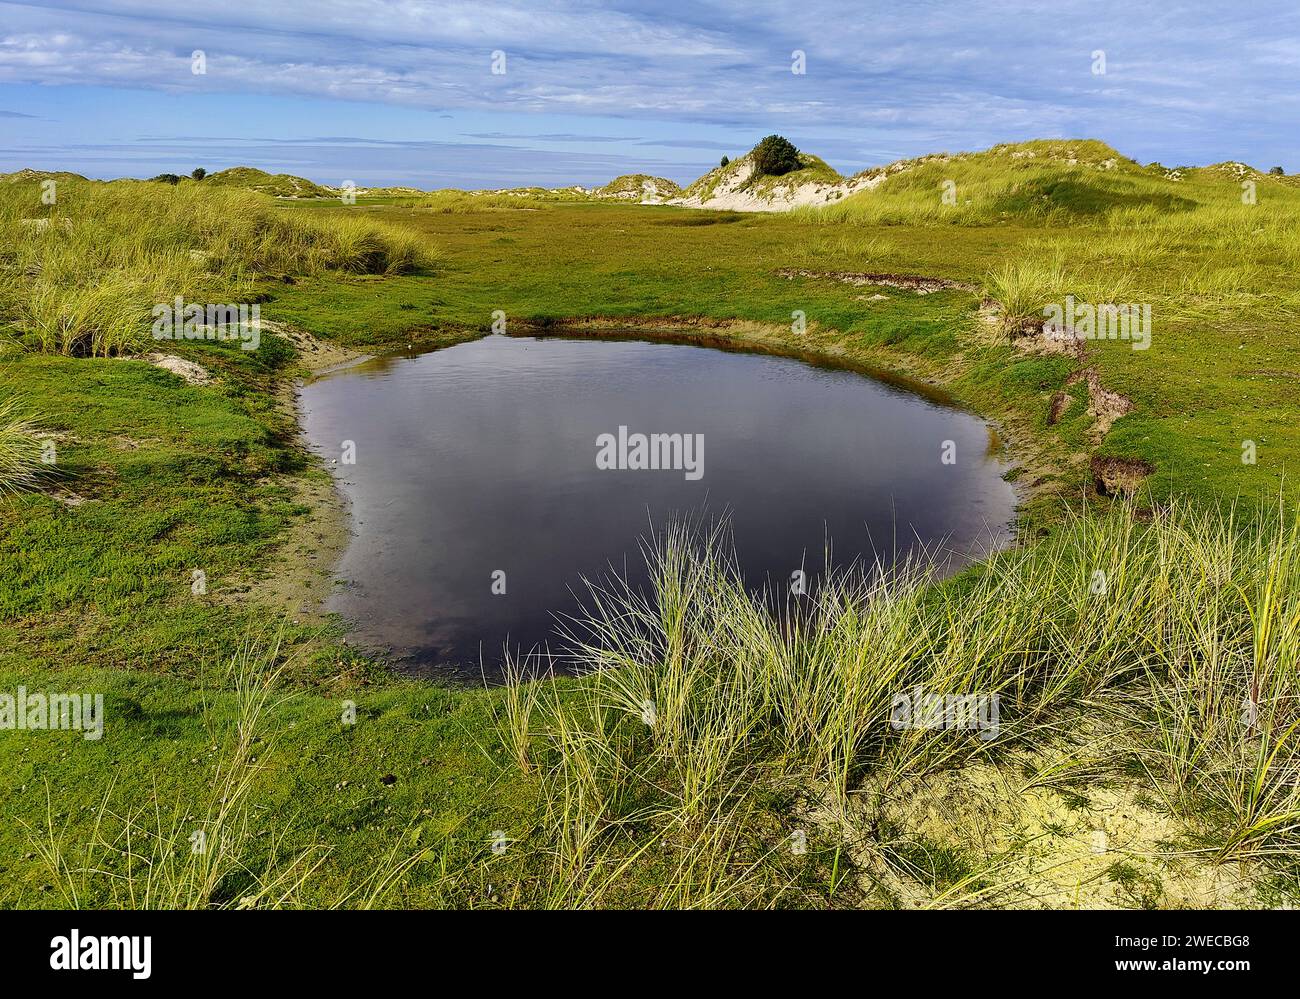 Landscape in the nature reserve at the eastern end of the island of Norderney, Germany, Lower Saxony, Norderney, East Frisia Stock Photo